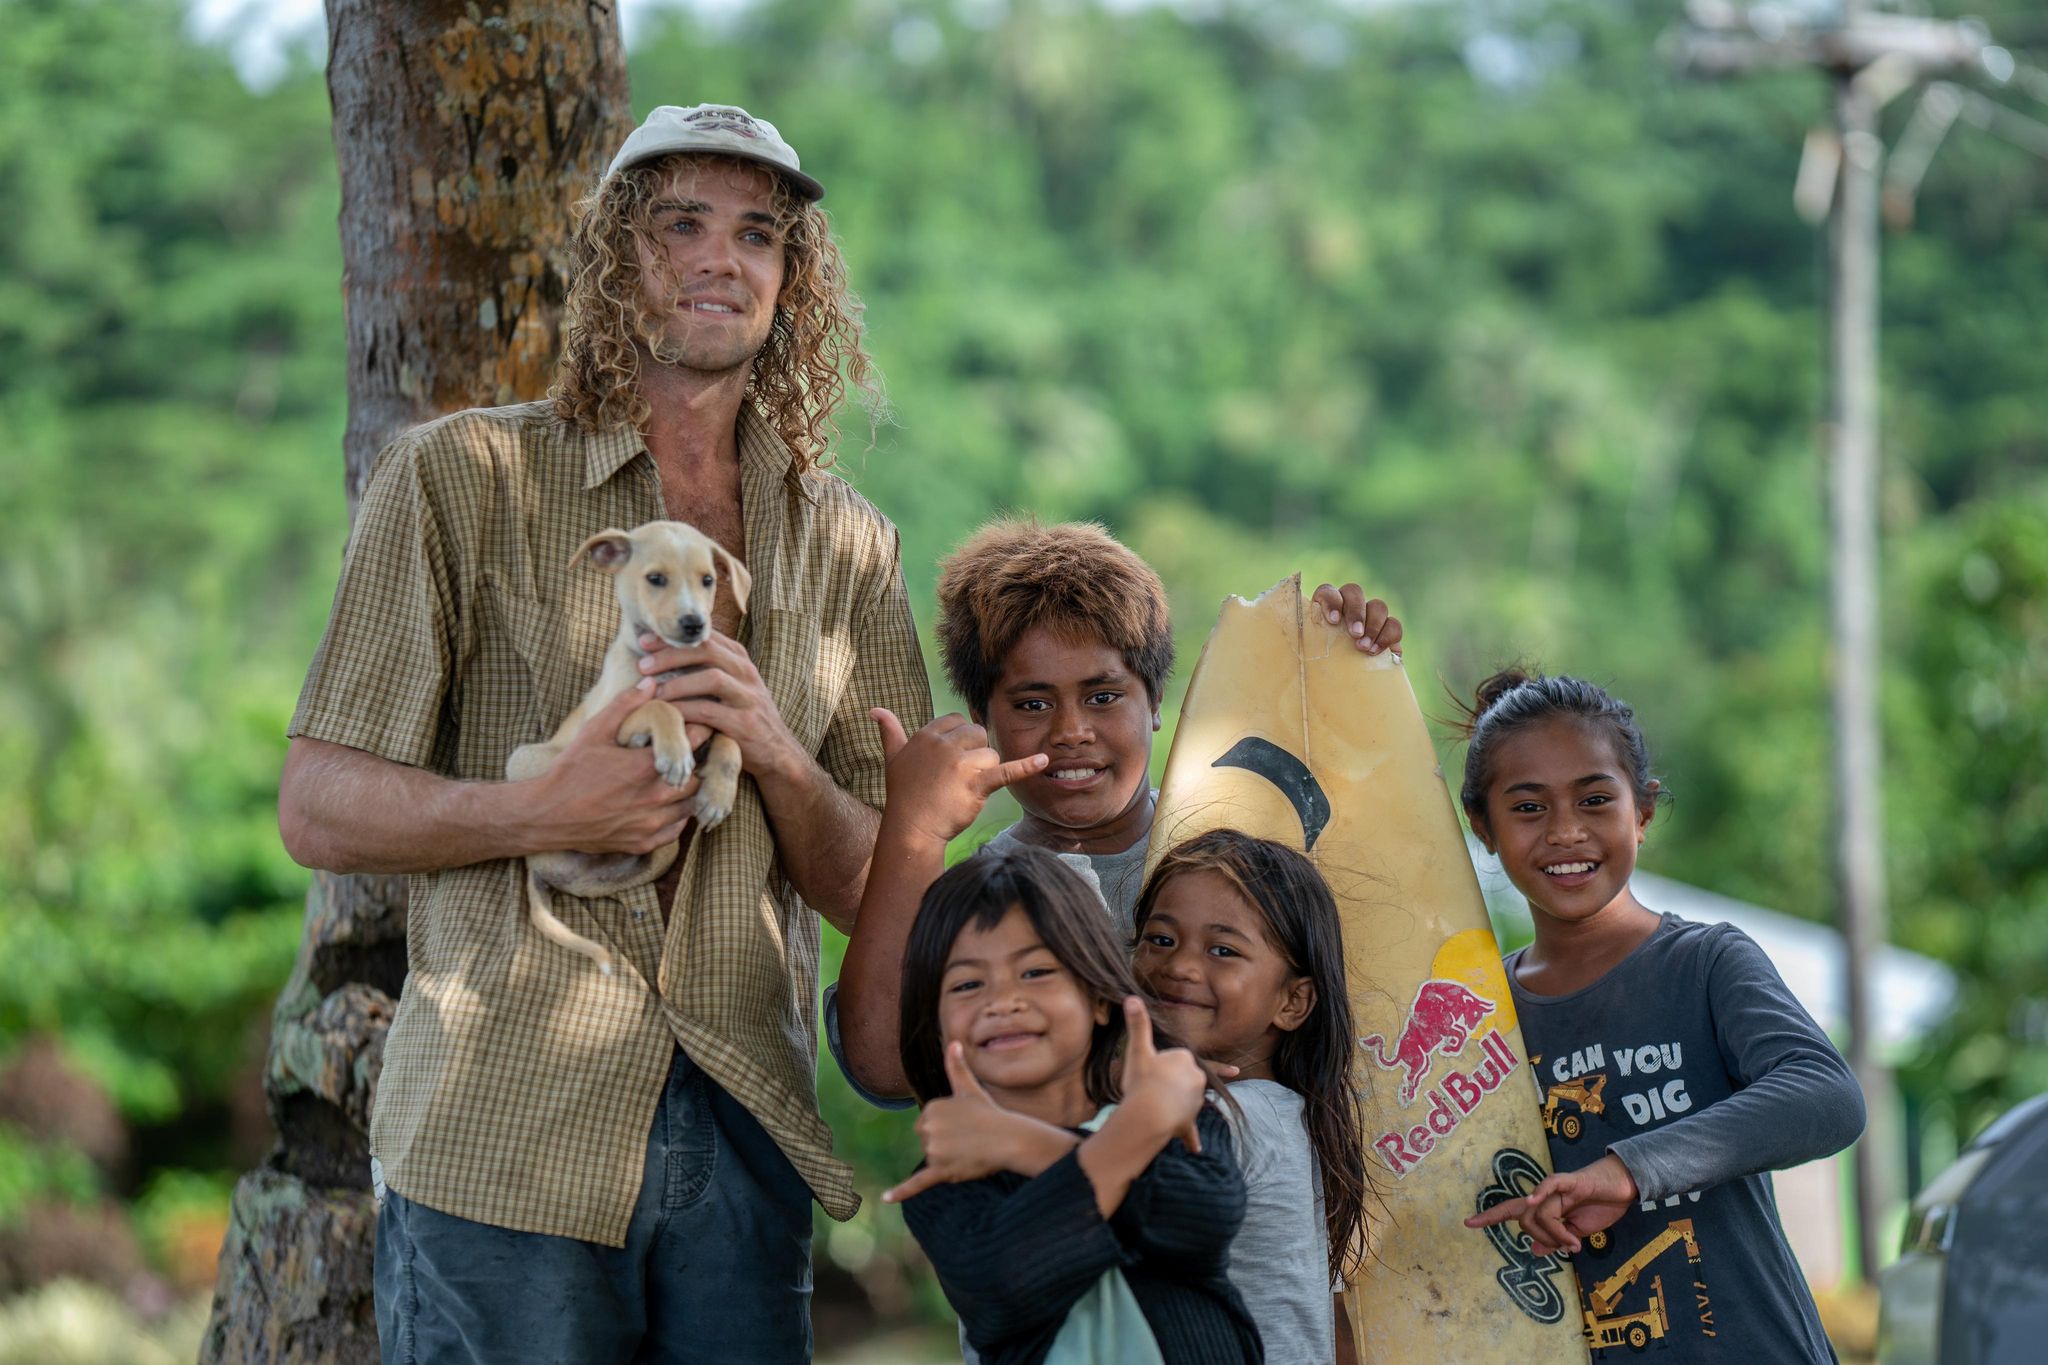 A man in his mid twenties holding a puppy, long curly hair, with some Islander children smiling with a surfboard and big smiles.